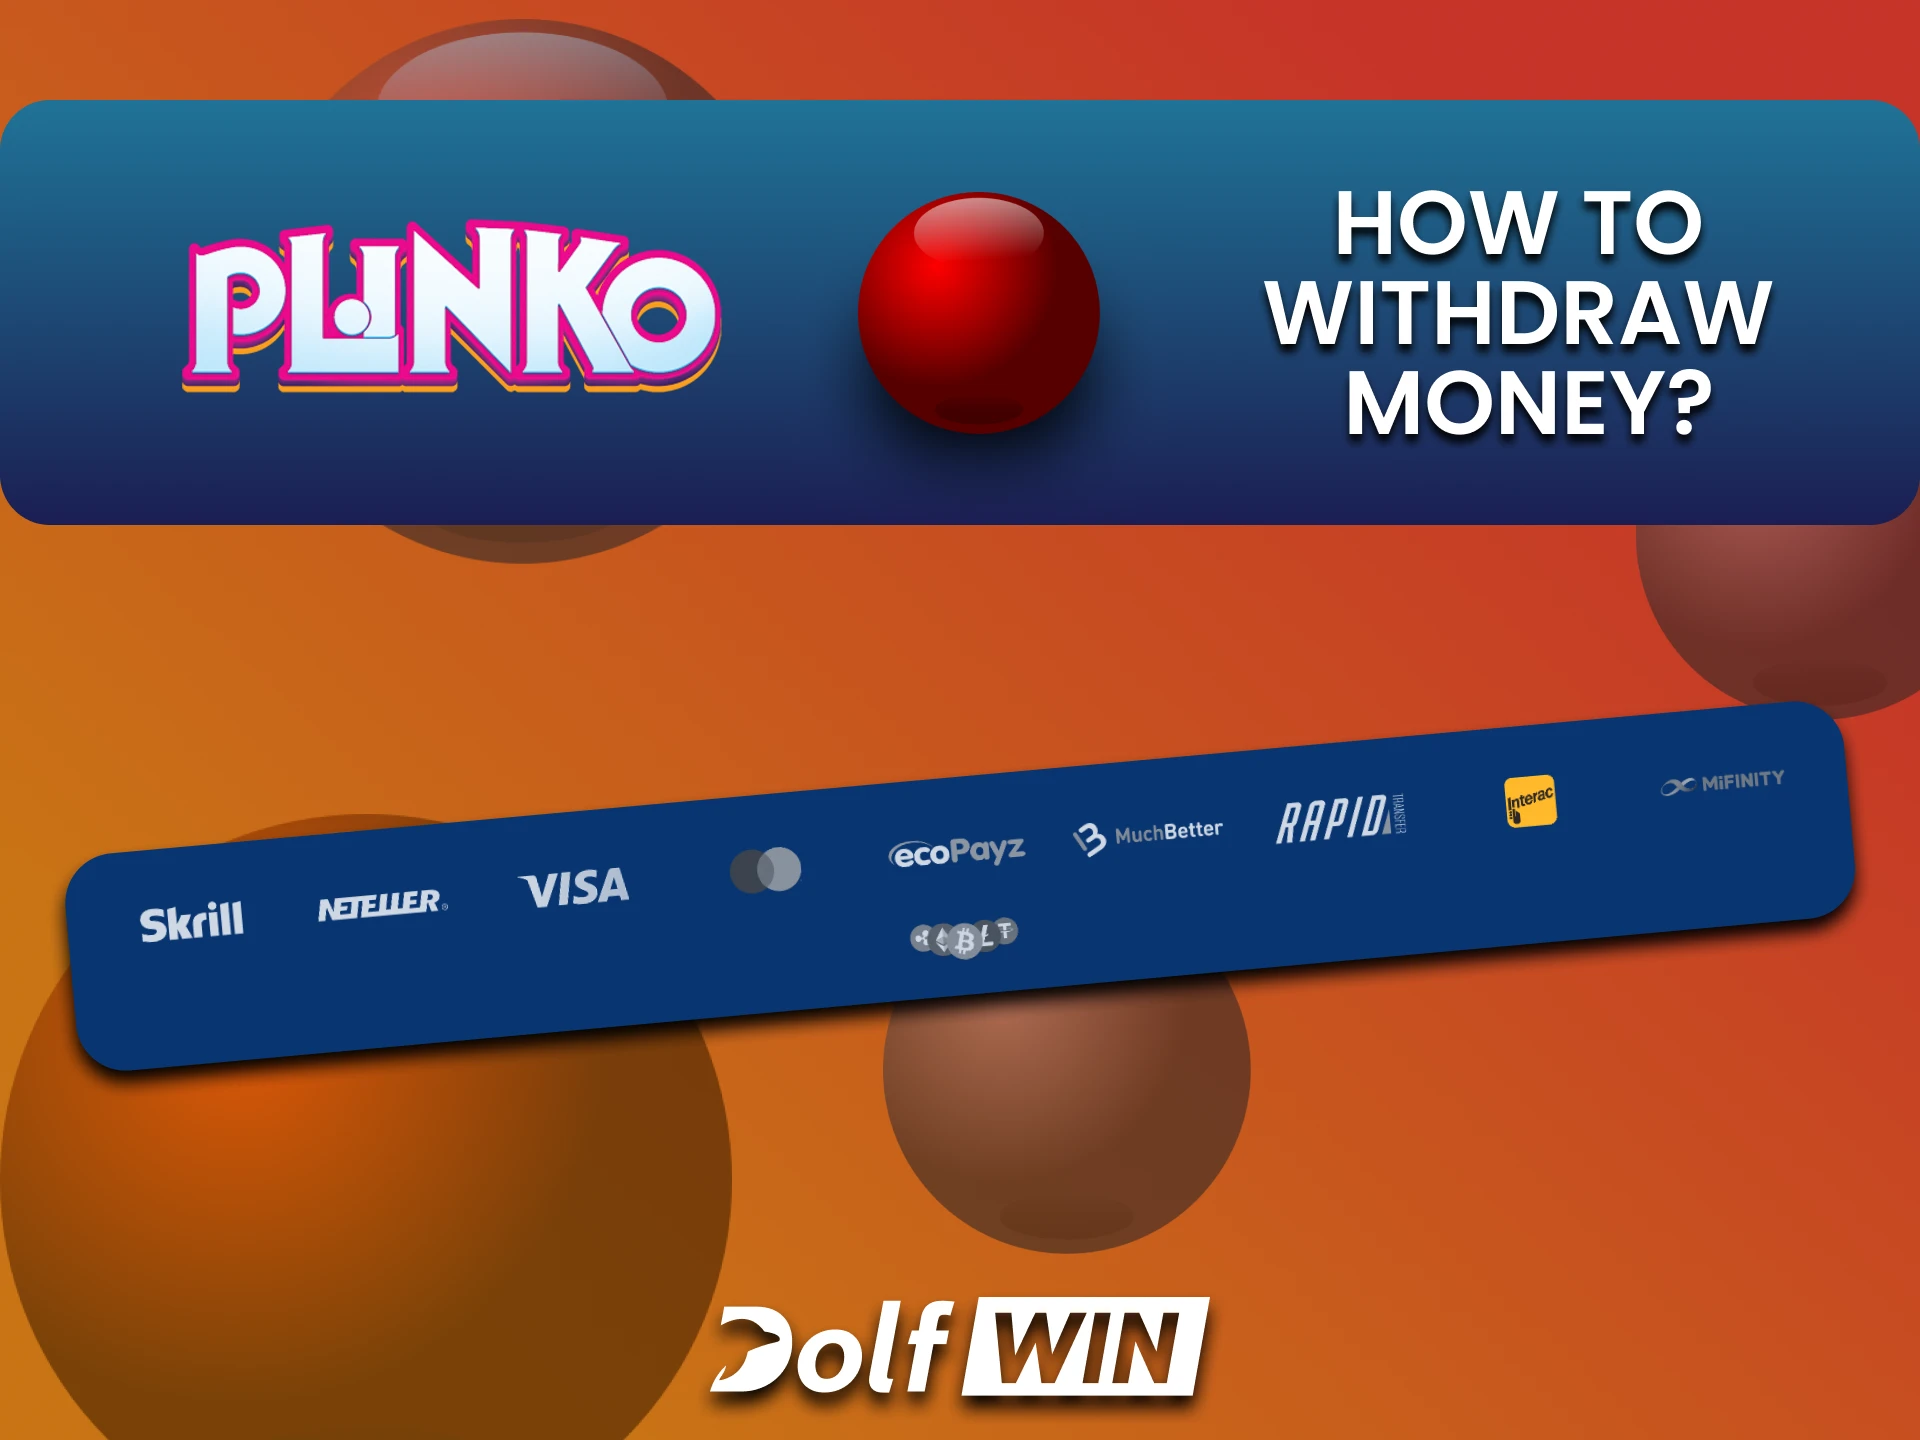 Learn how to withdraw funds on the Dolfwin website for the game Plinko.